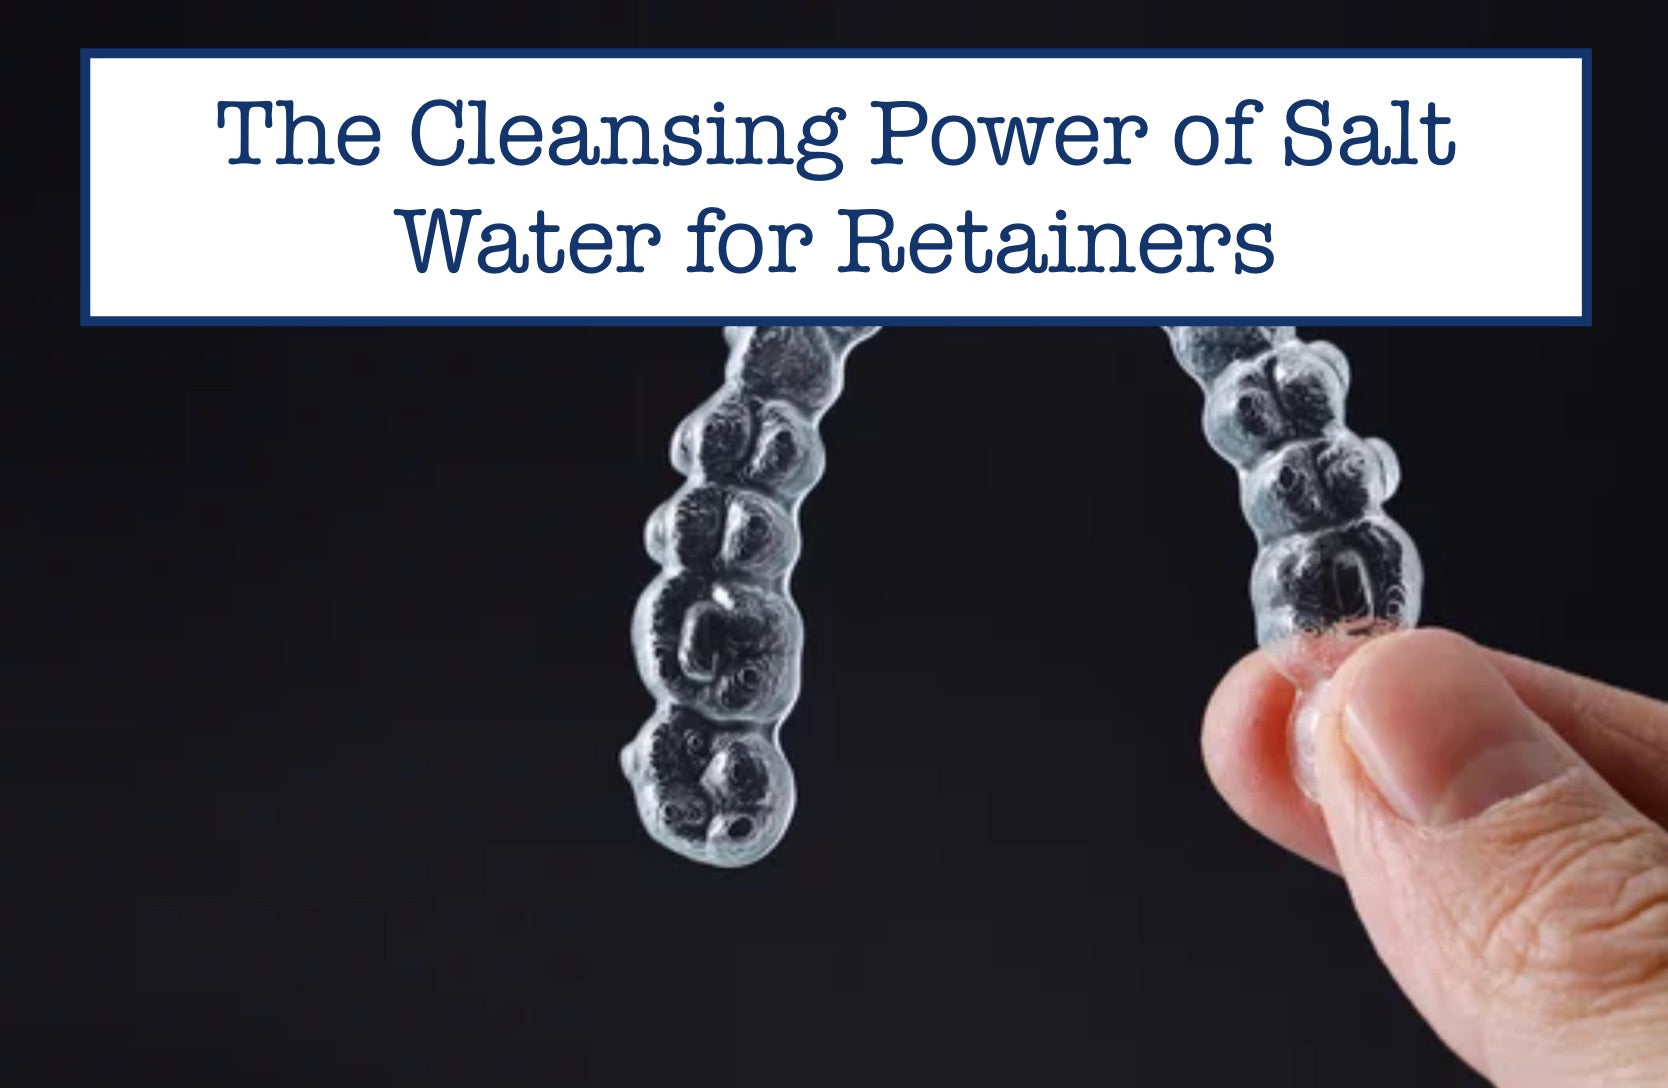 The Cleansing Power of Salt Water for Retainers